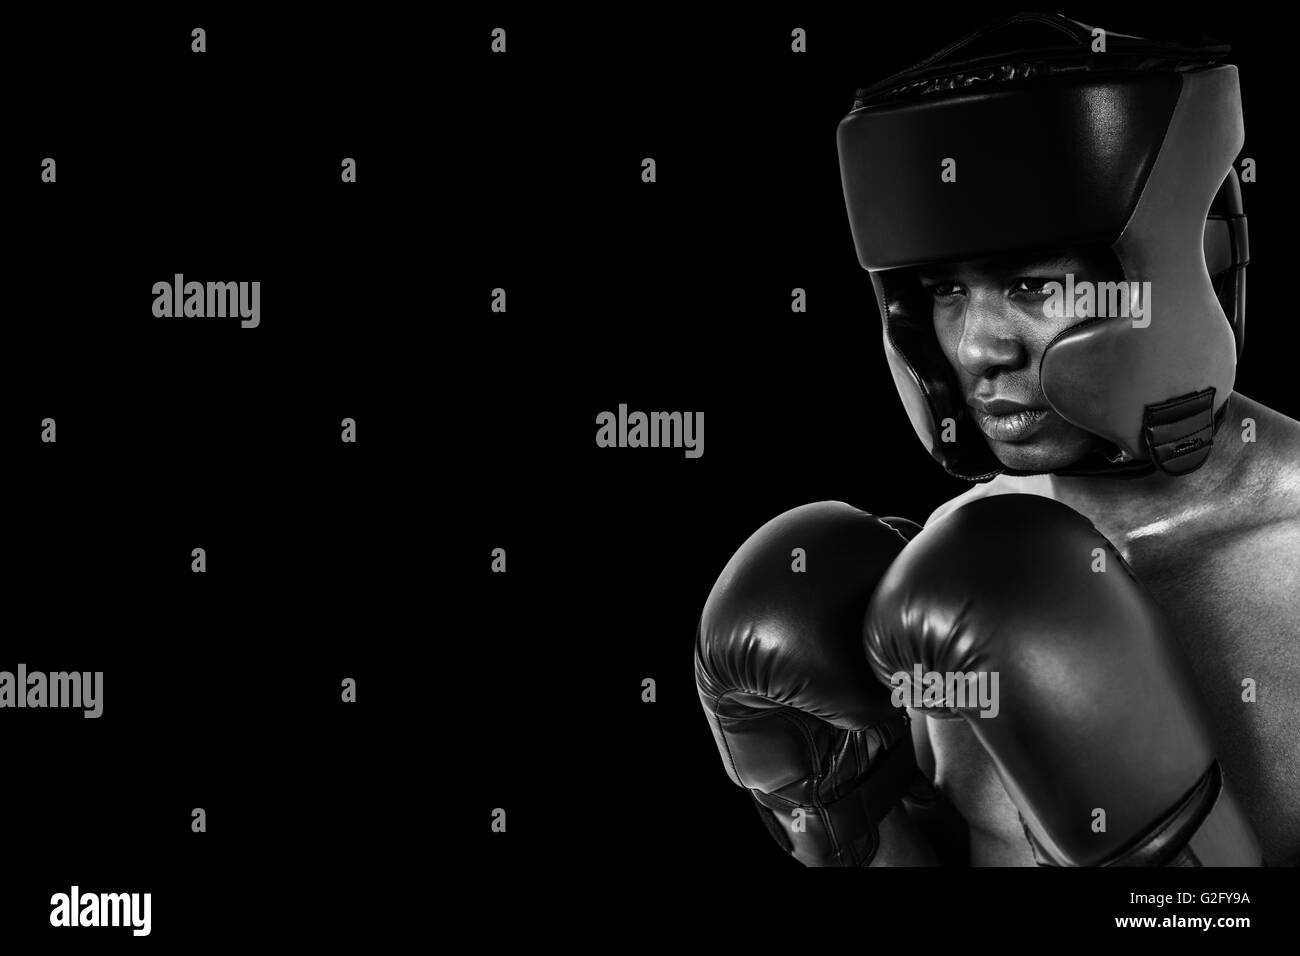 Composite image of boxer performing boxing stance Stock Photo